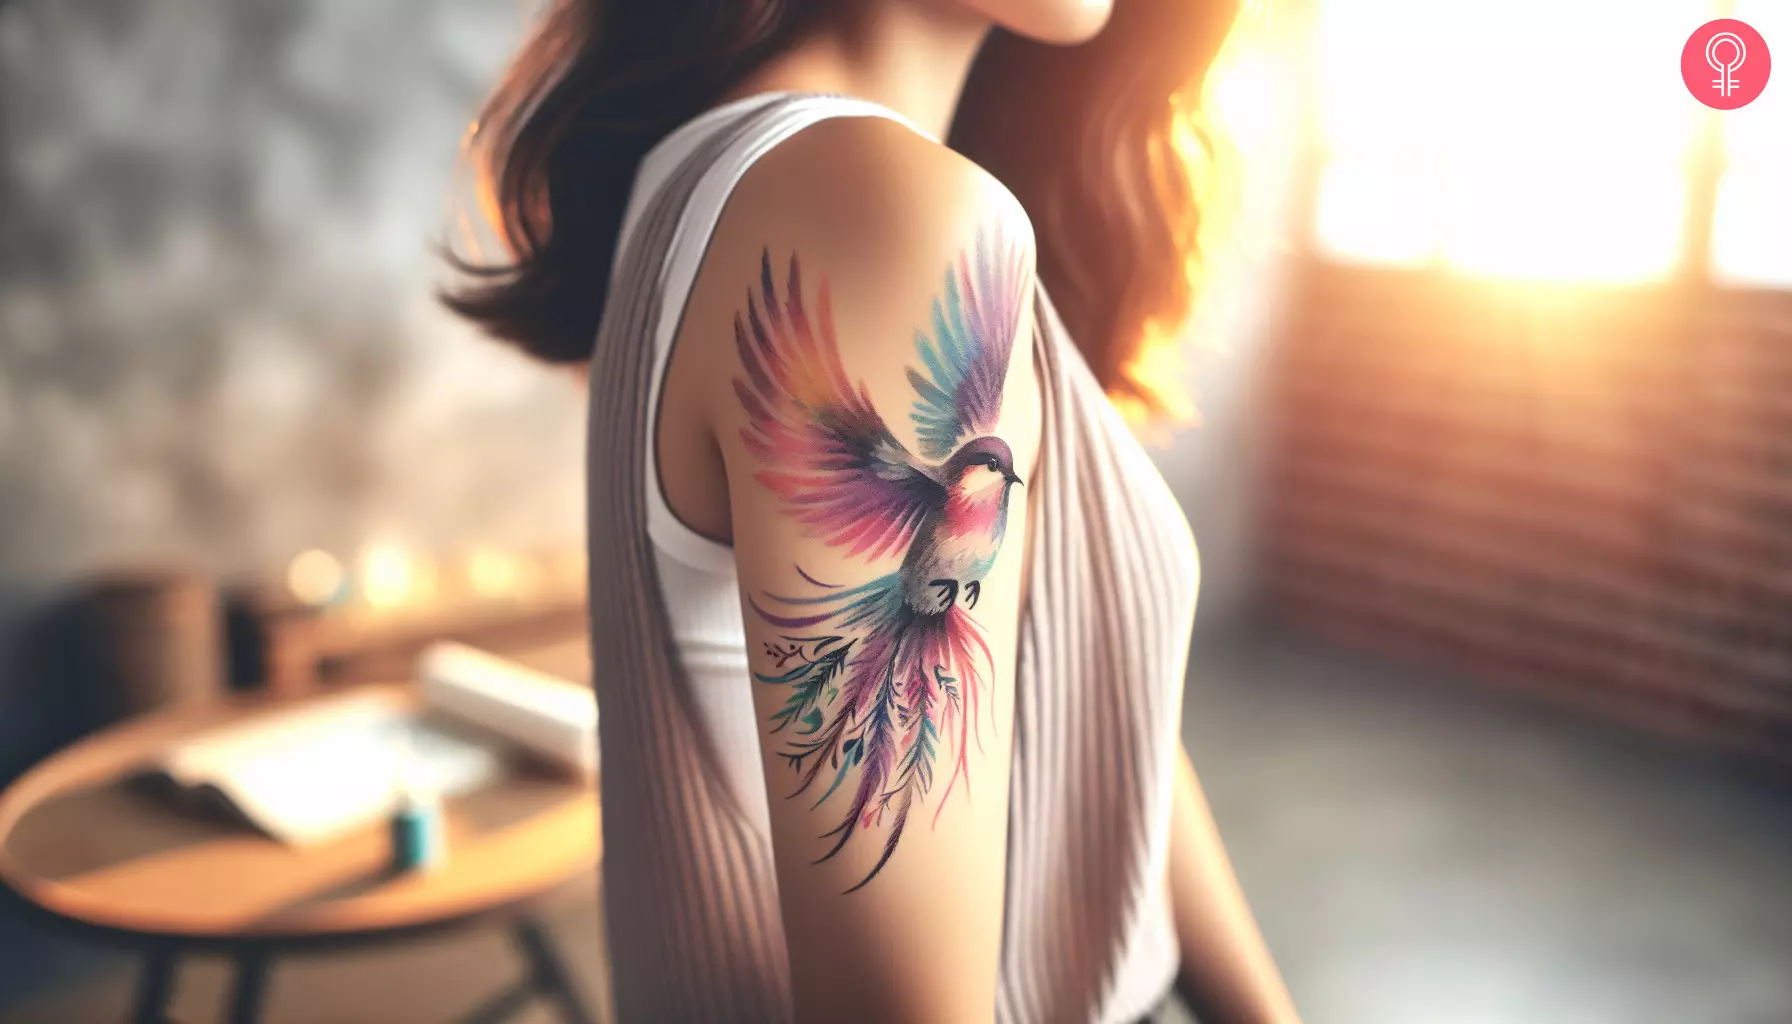 Watercolor bird tattoo on the arm of a woman